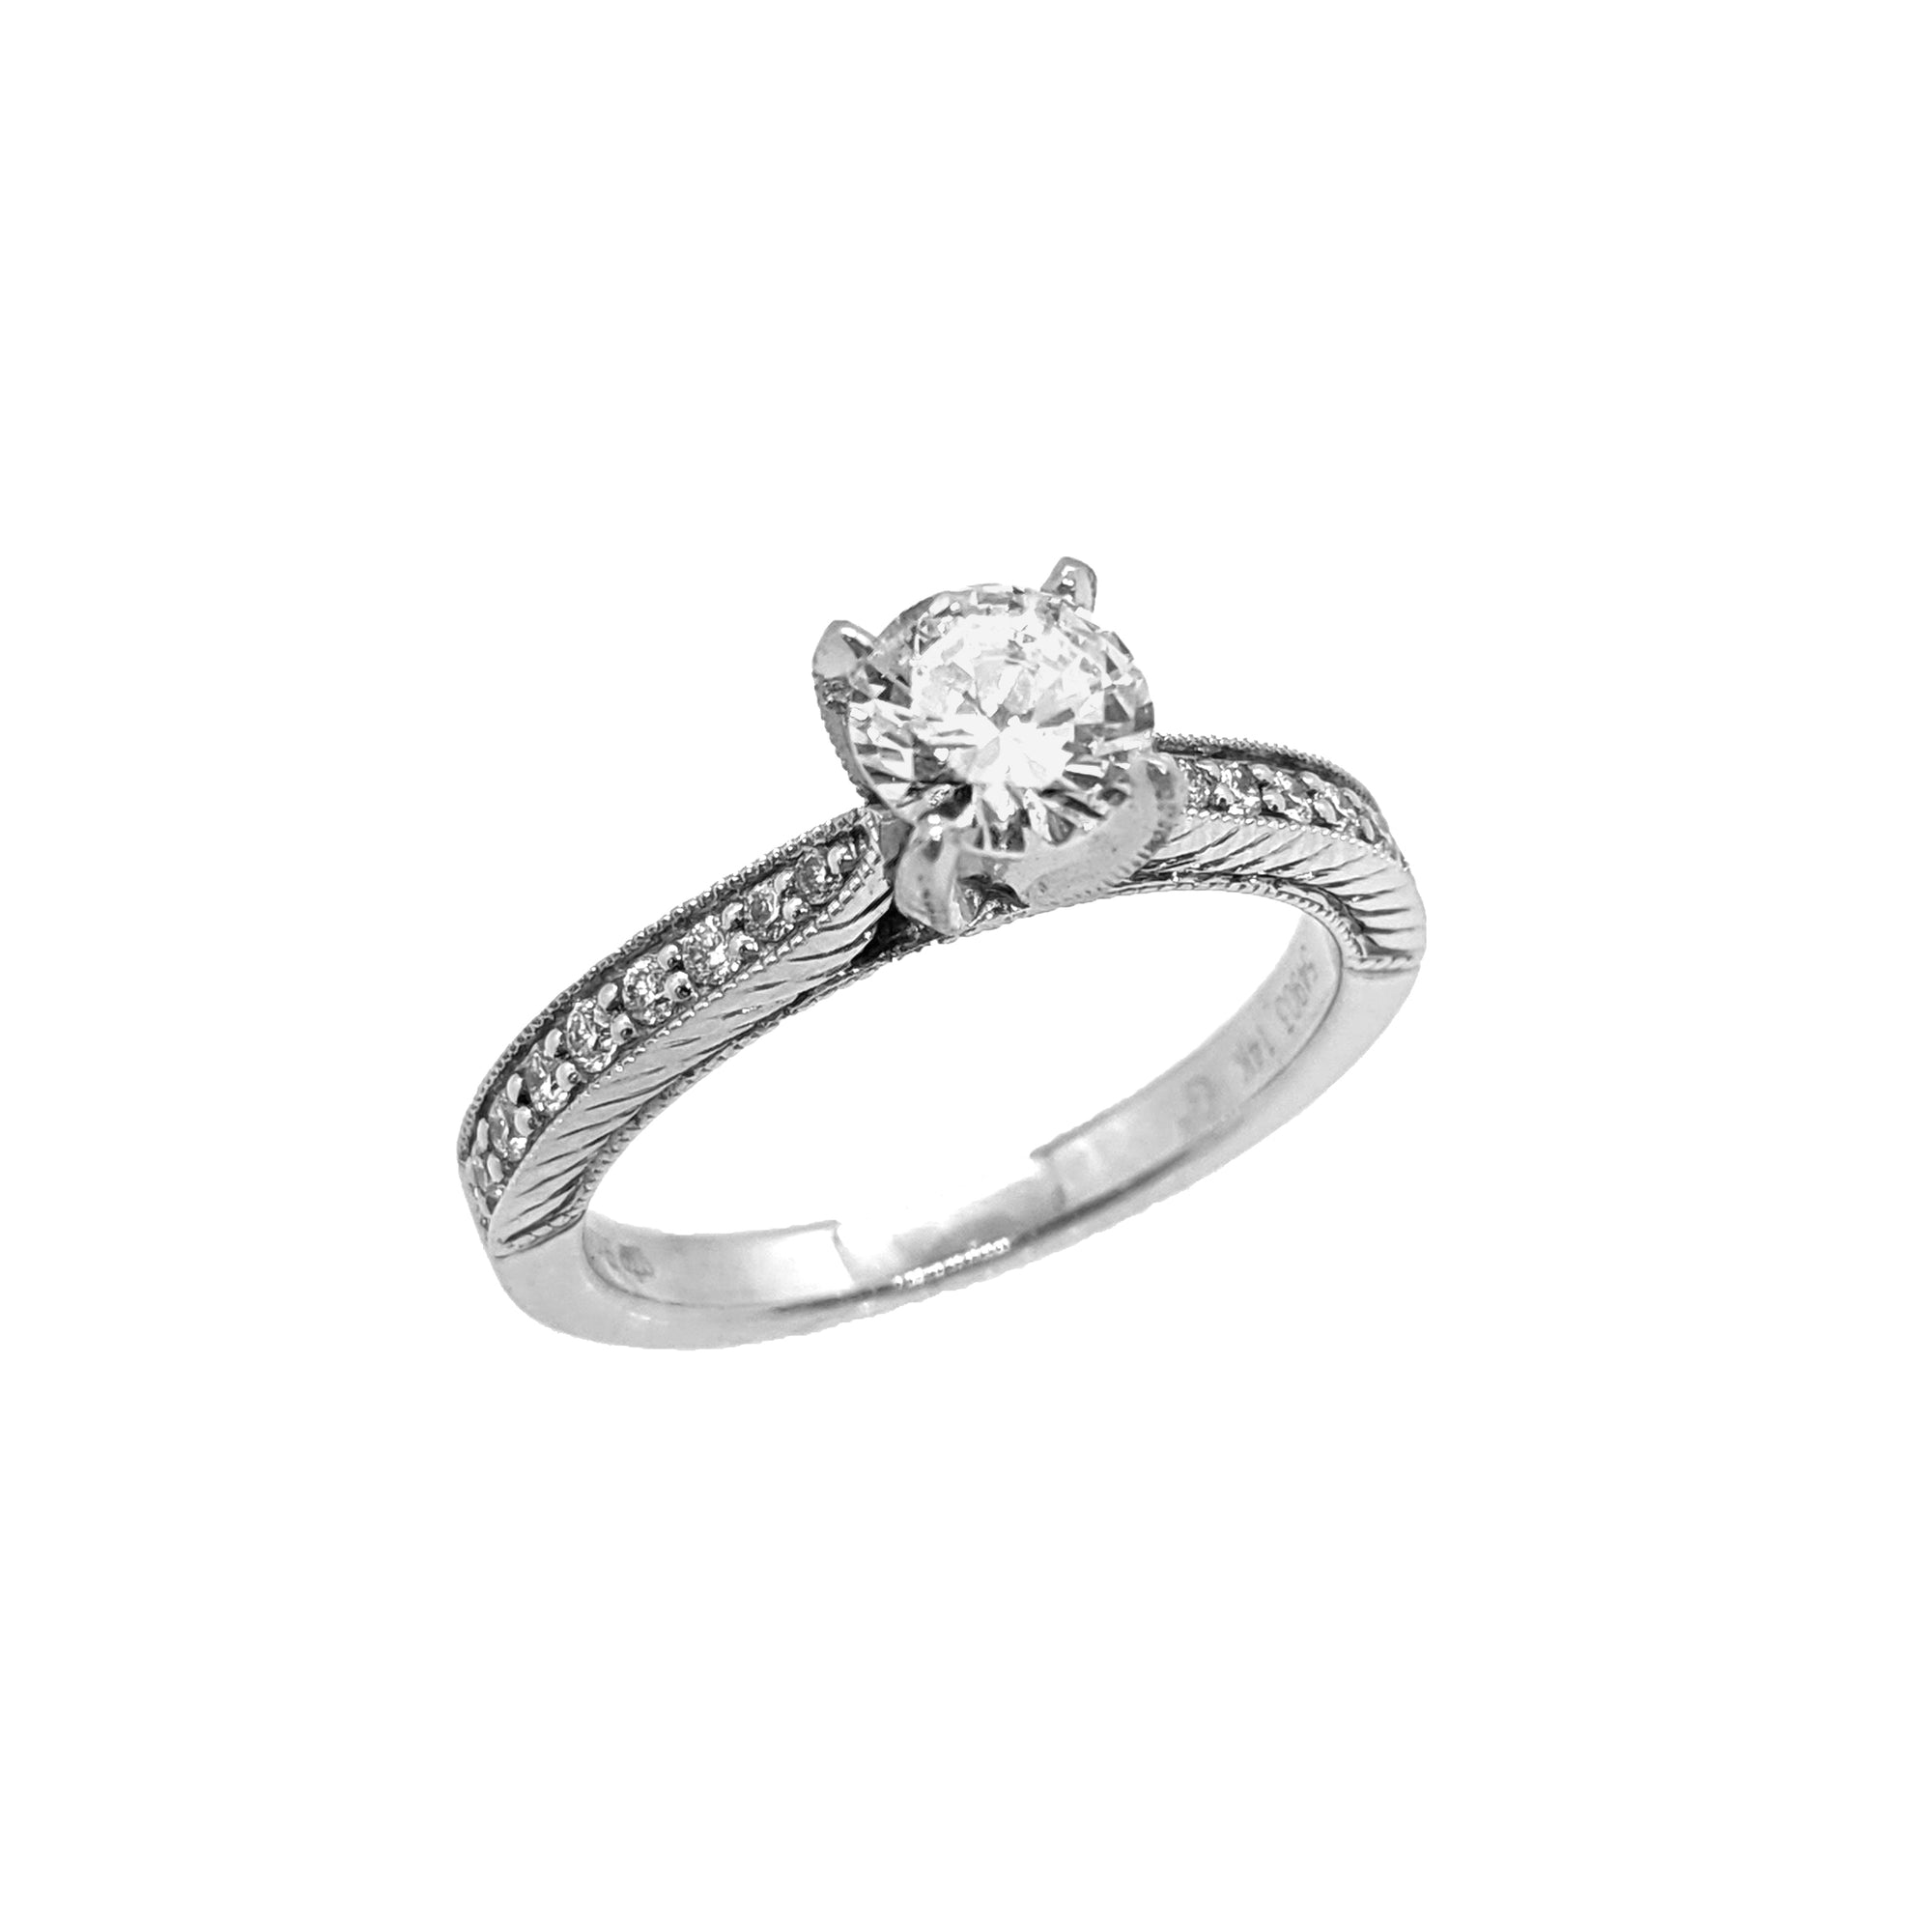 14K W/G Diamond Ring with Milgrain and Engraved Details